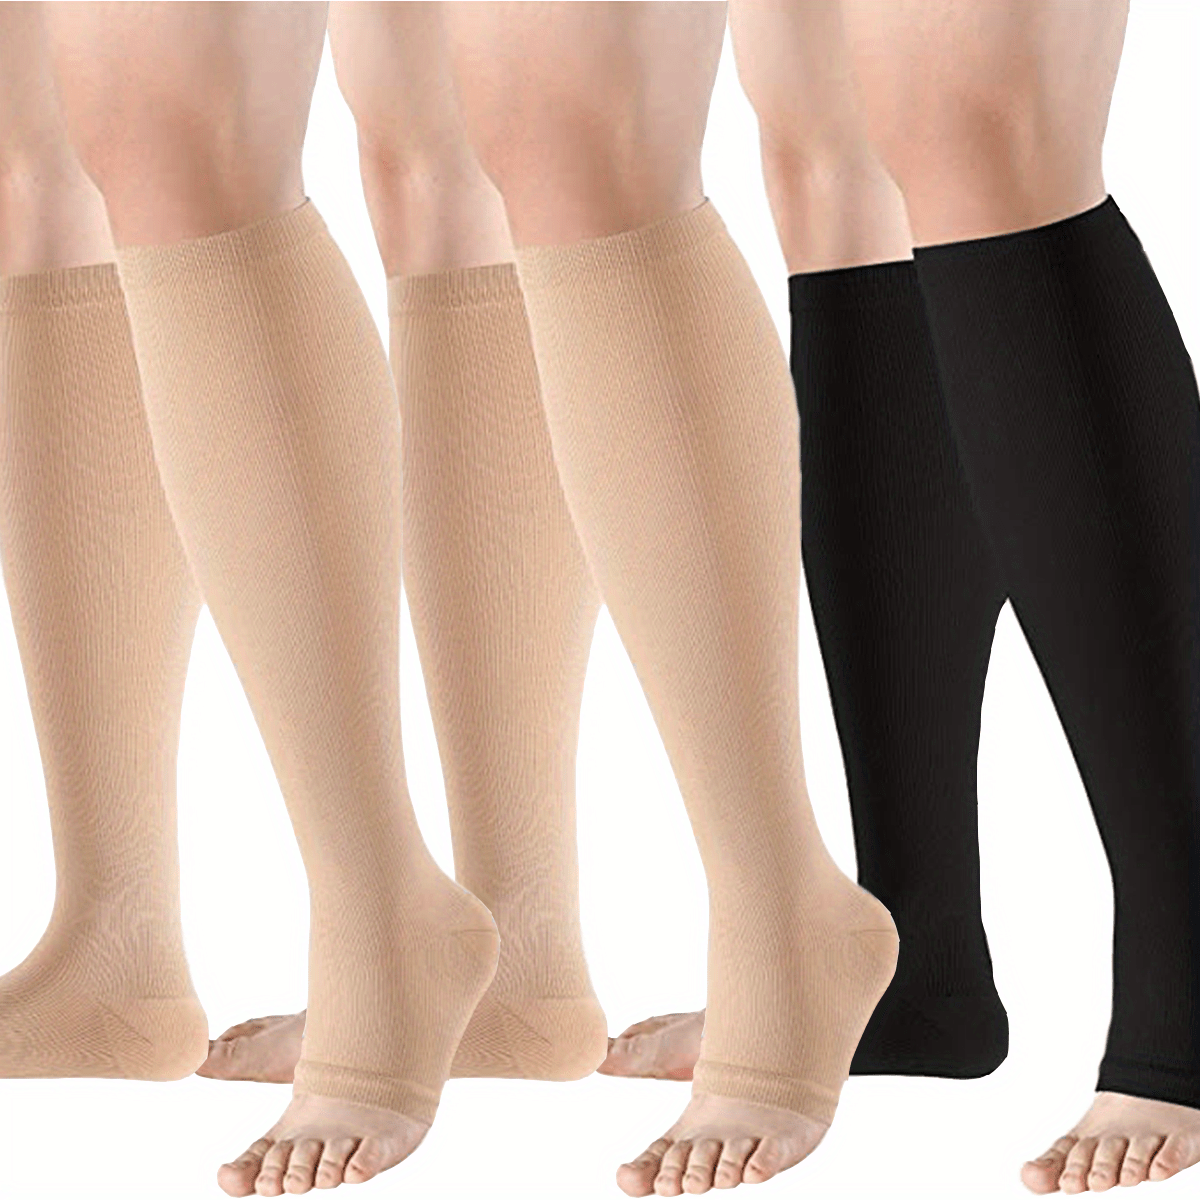 Men's Compression Recovery Tights  20-30 mmHg – Compression Stockings